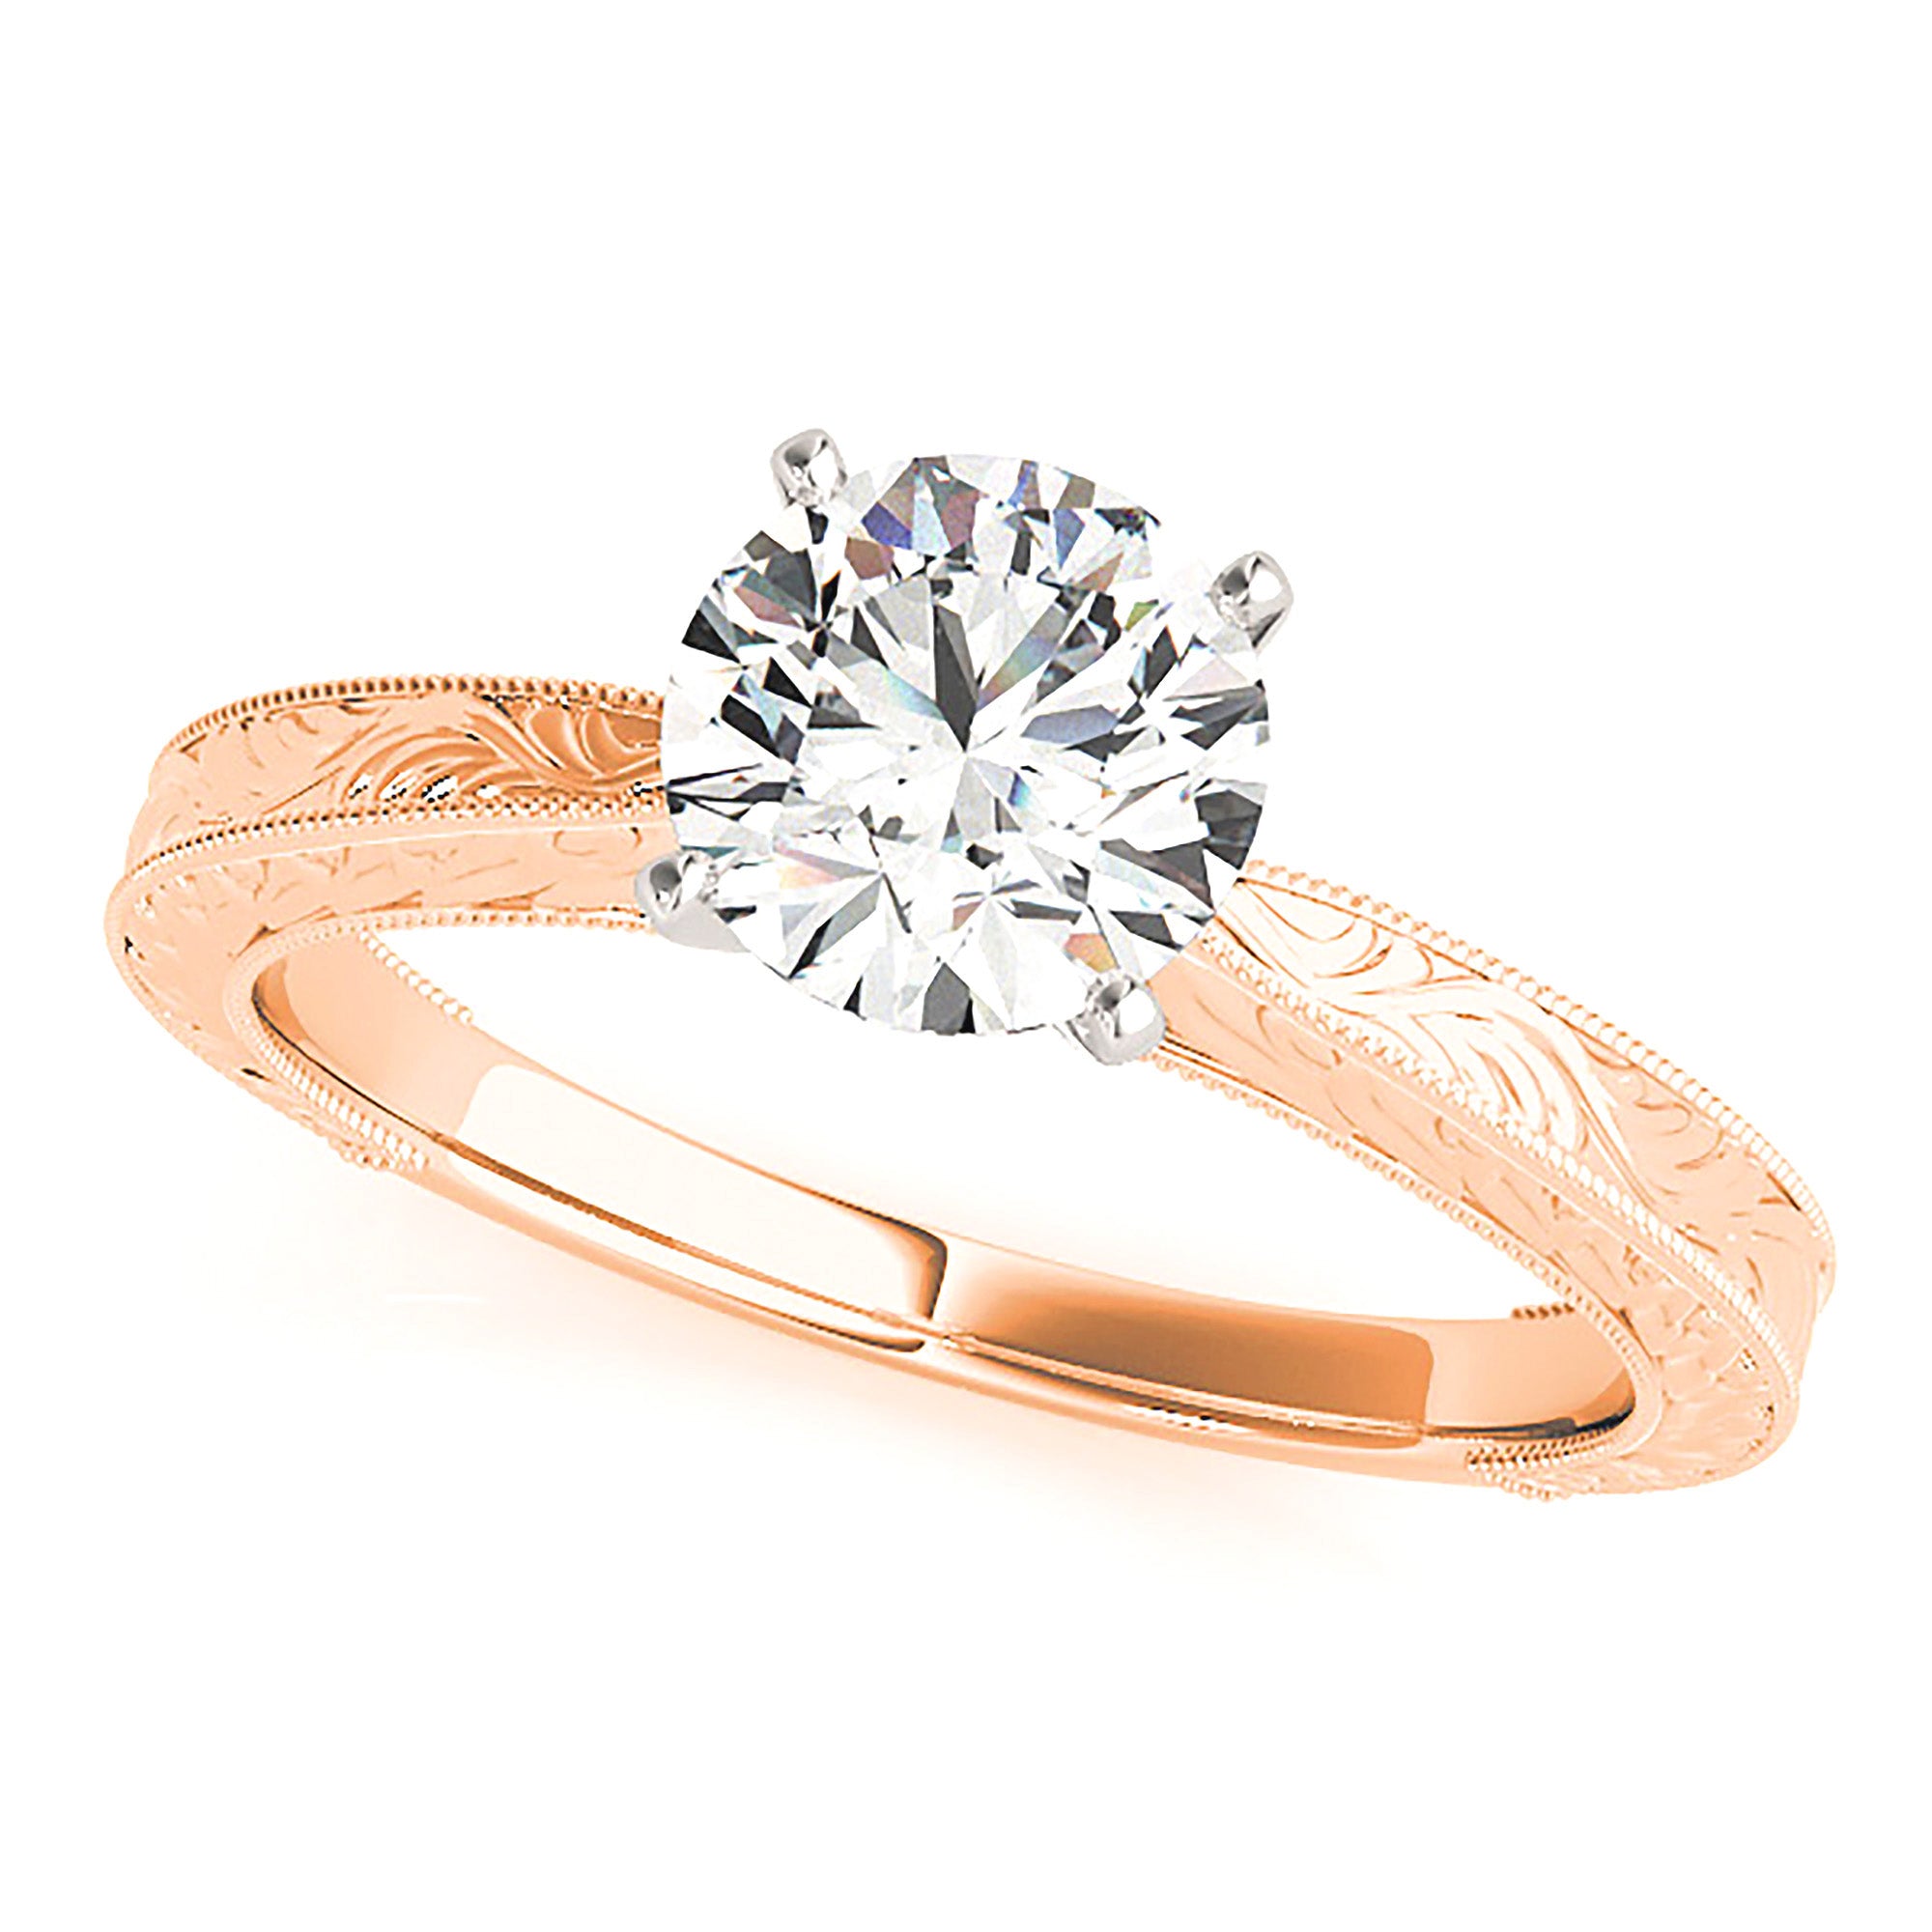 Hand Engraved Solitaire Engagement Ring-in 14K/18K White, Yellow, Rose Gold and Platinum - Christmas Jewelry Gift -VIRABYANI